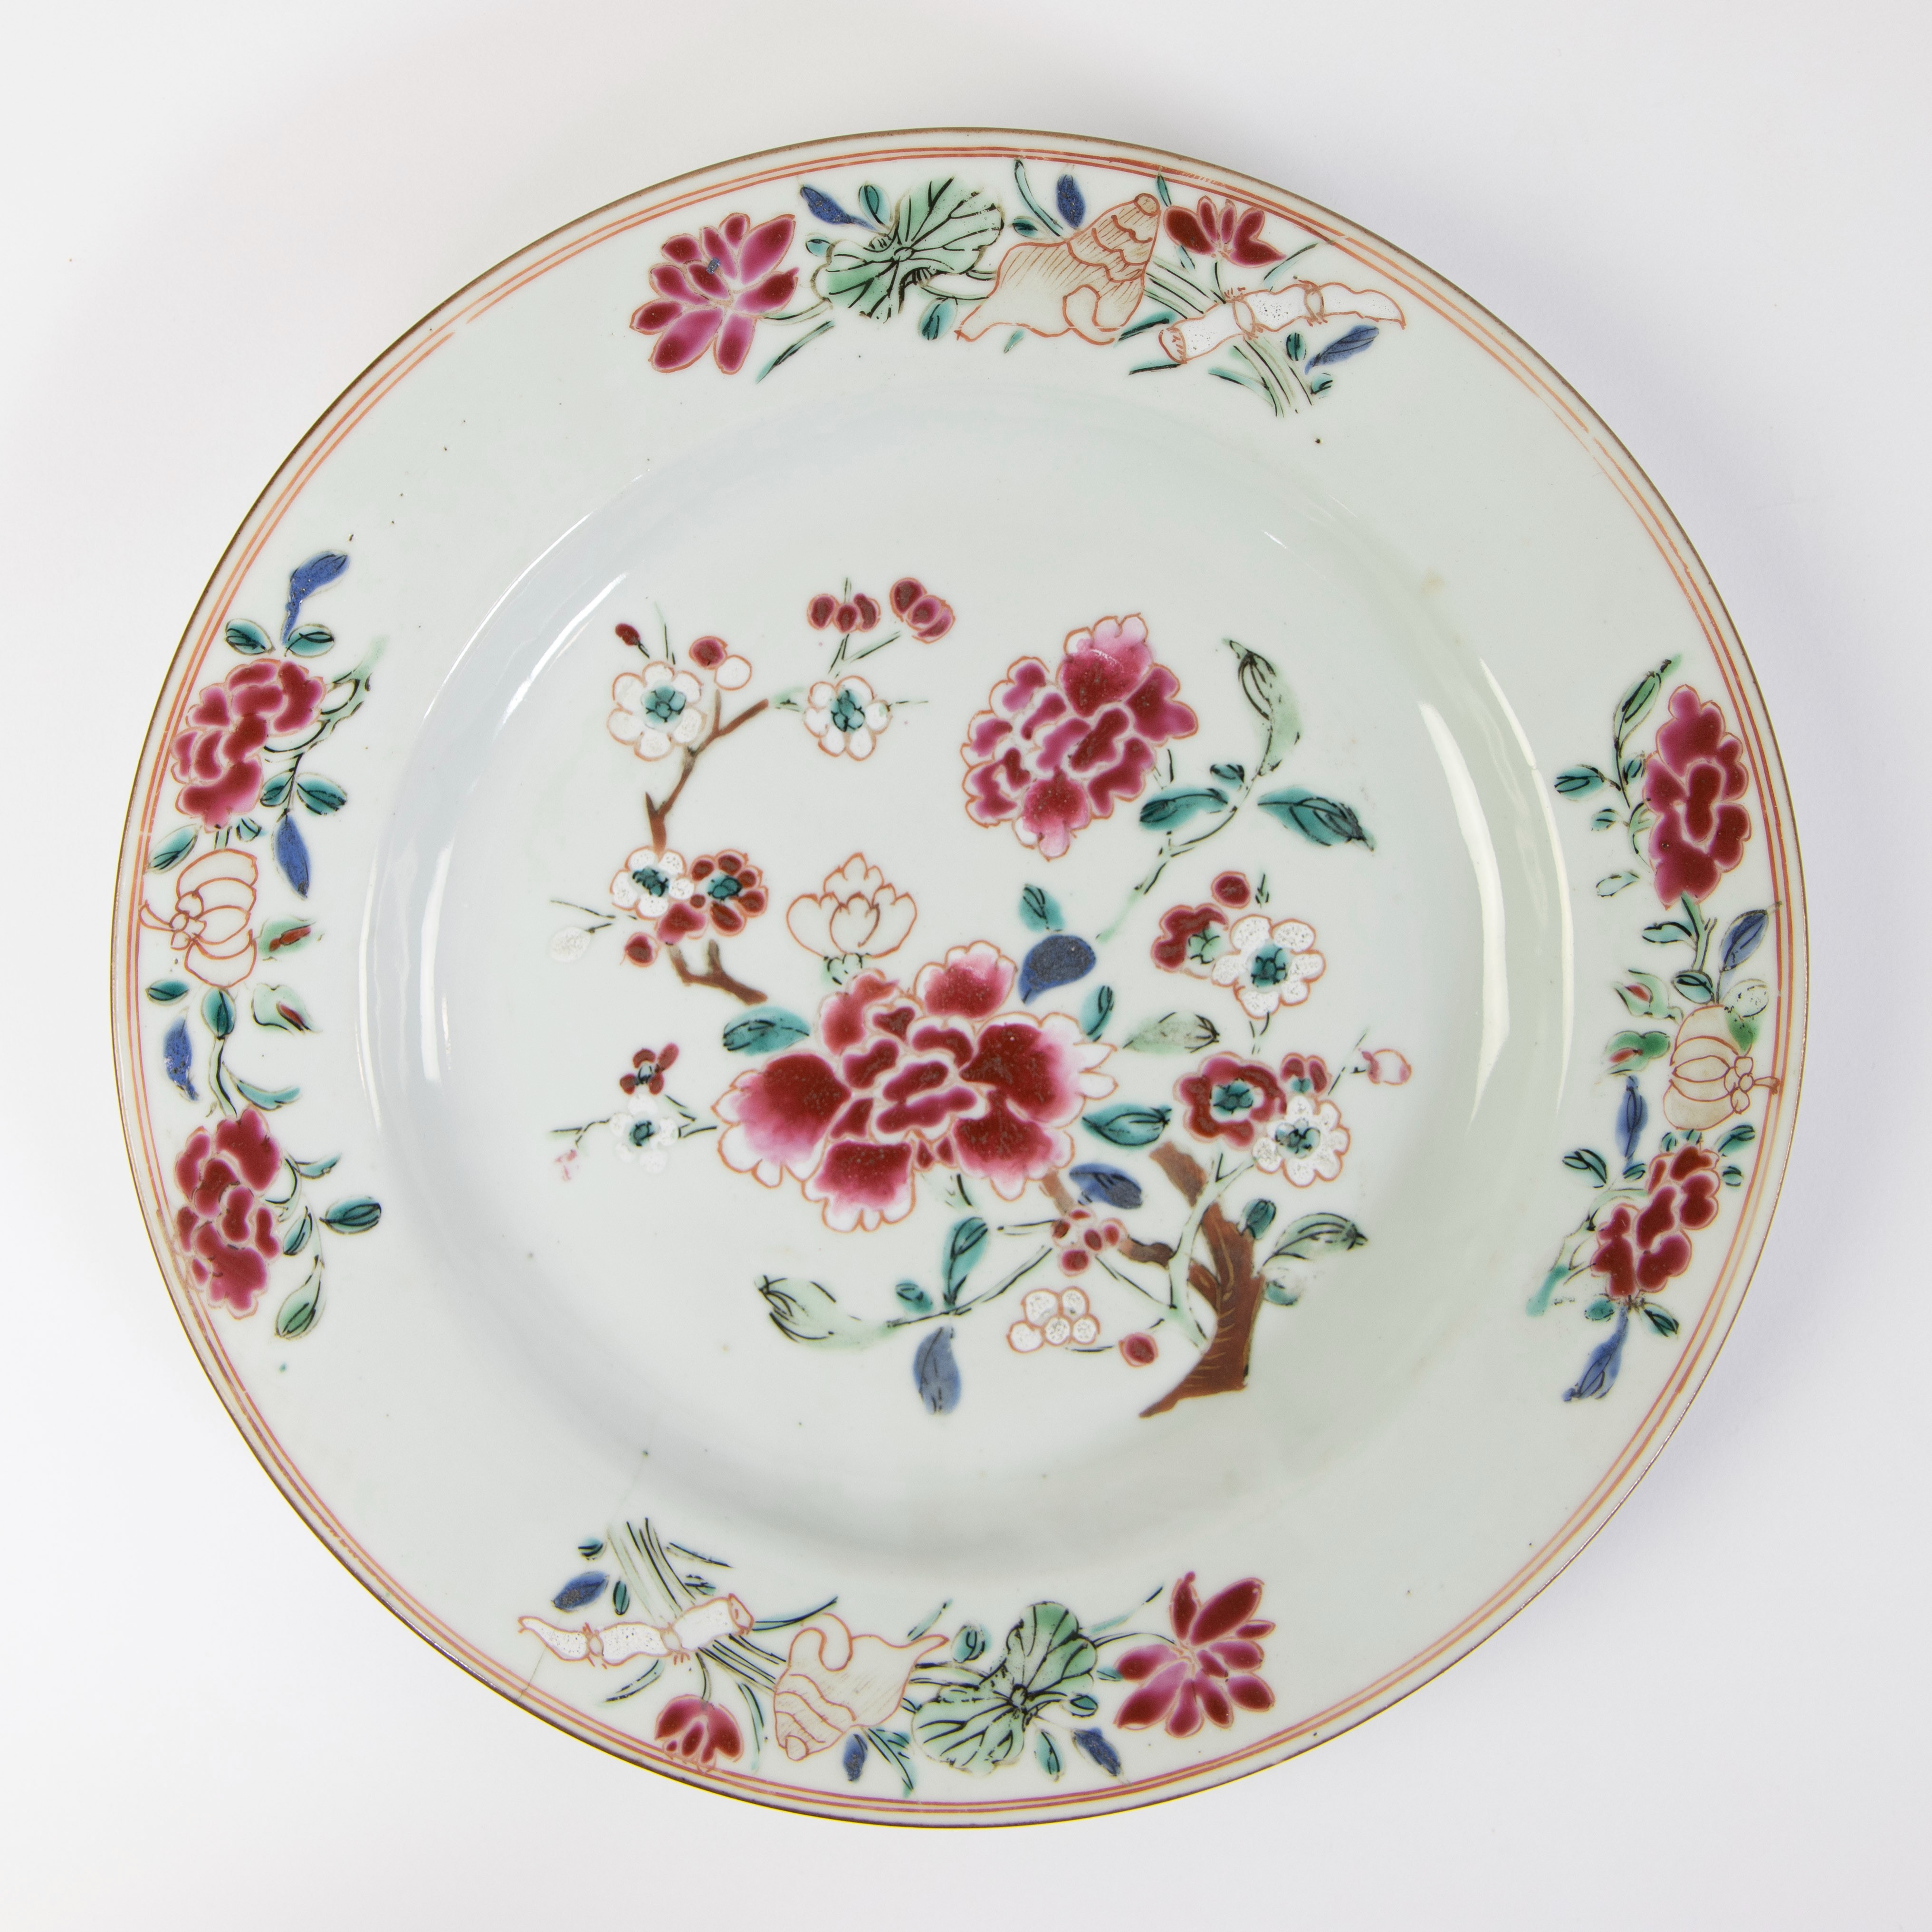 Lot of 5 Chinese famille rose plates, 18th century - Image 12 of 18